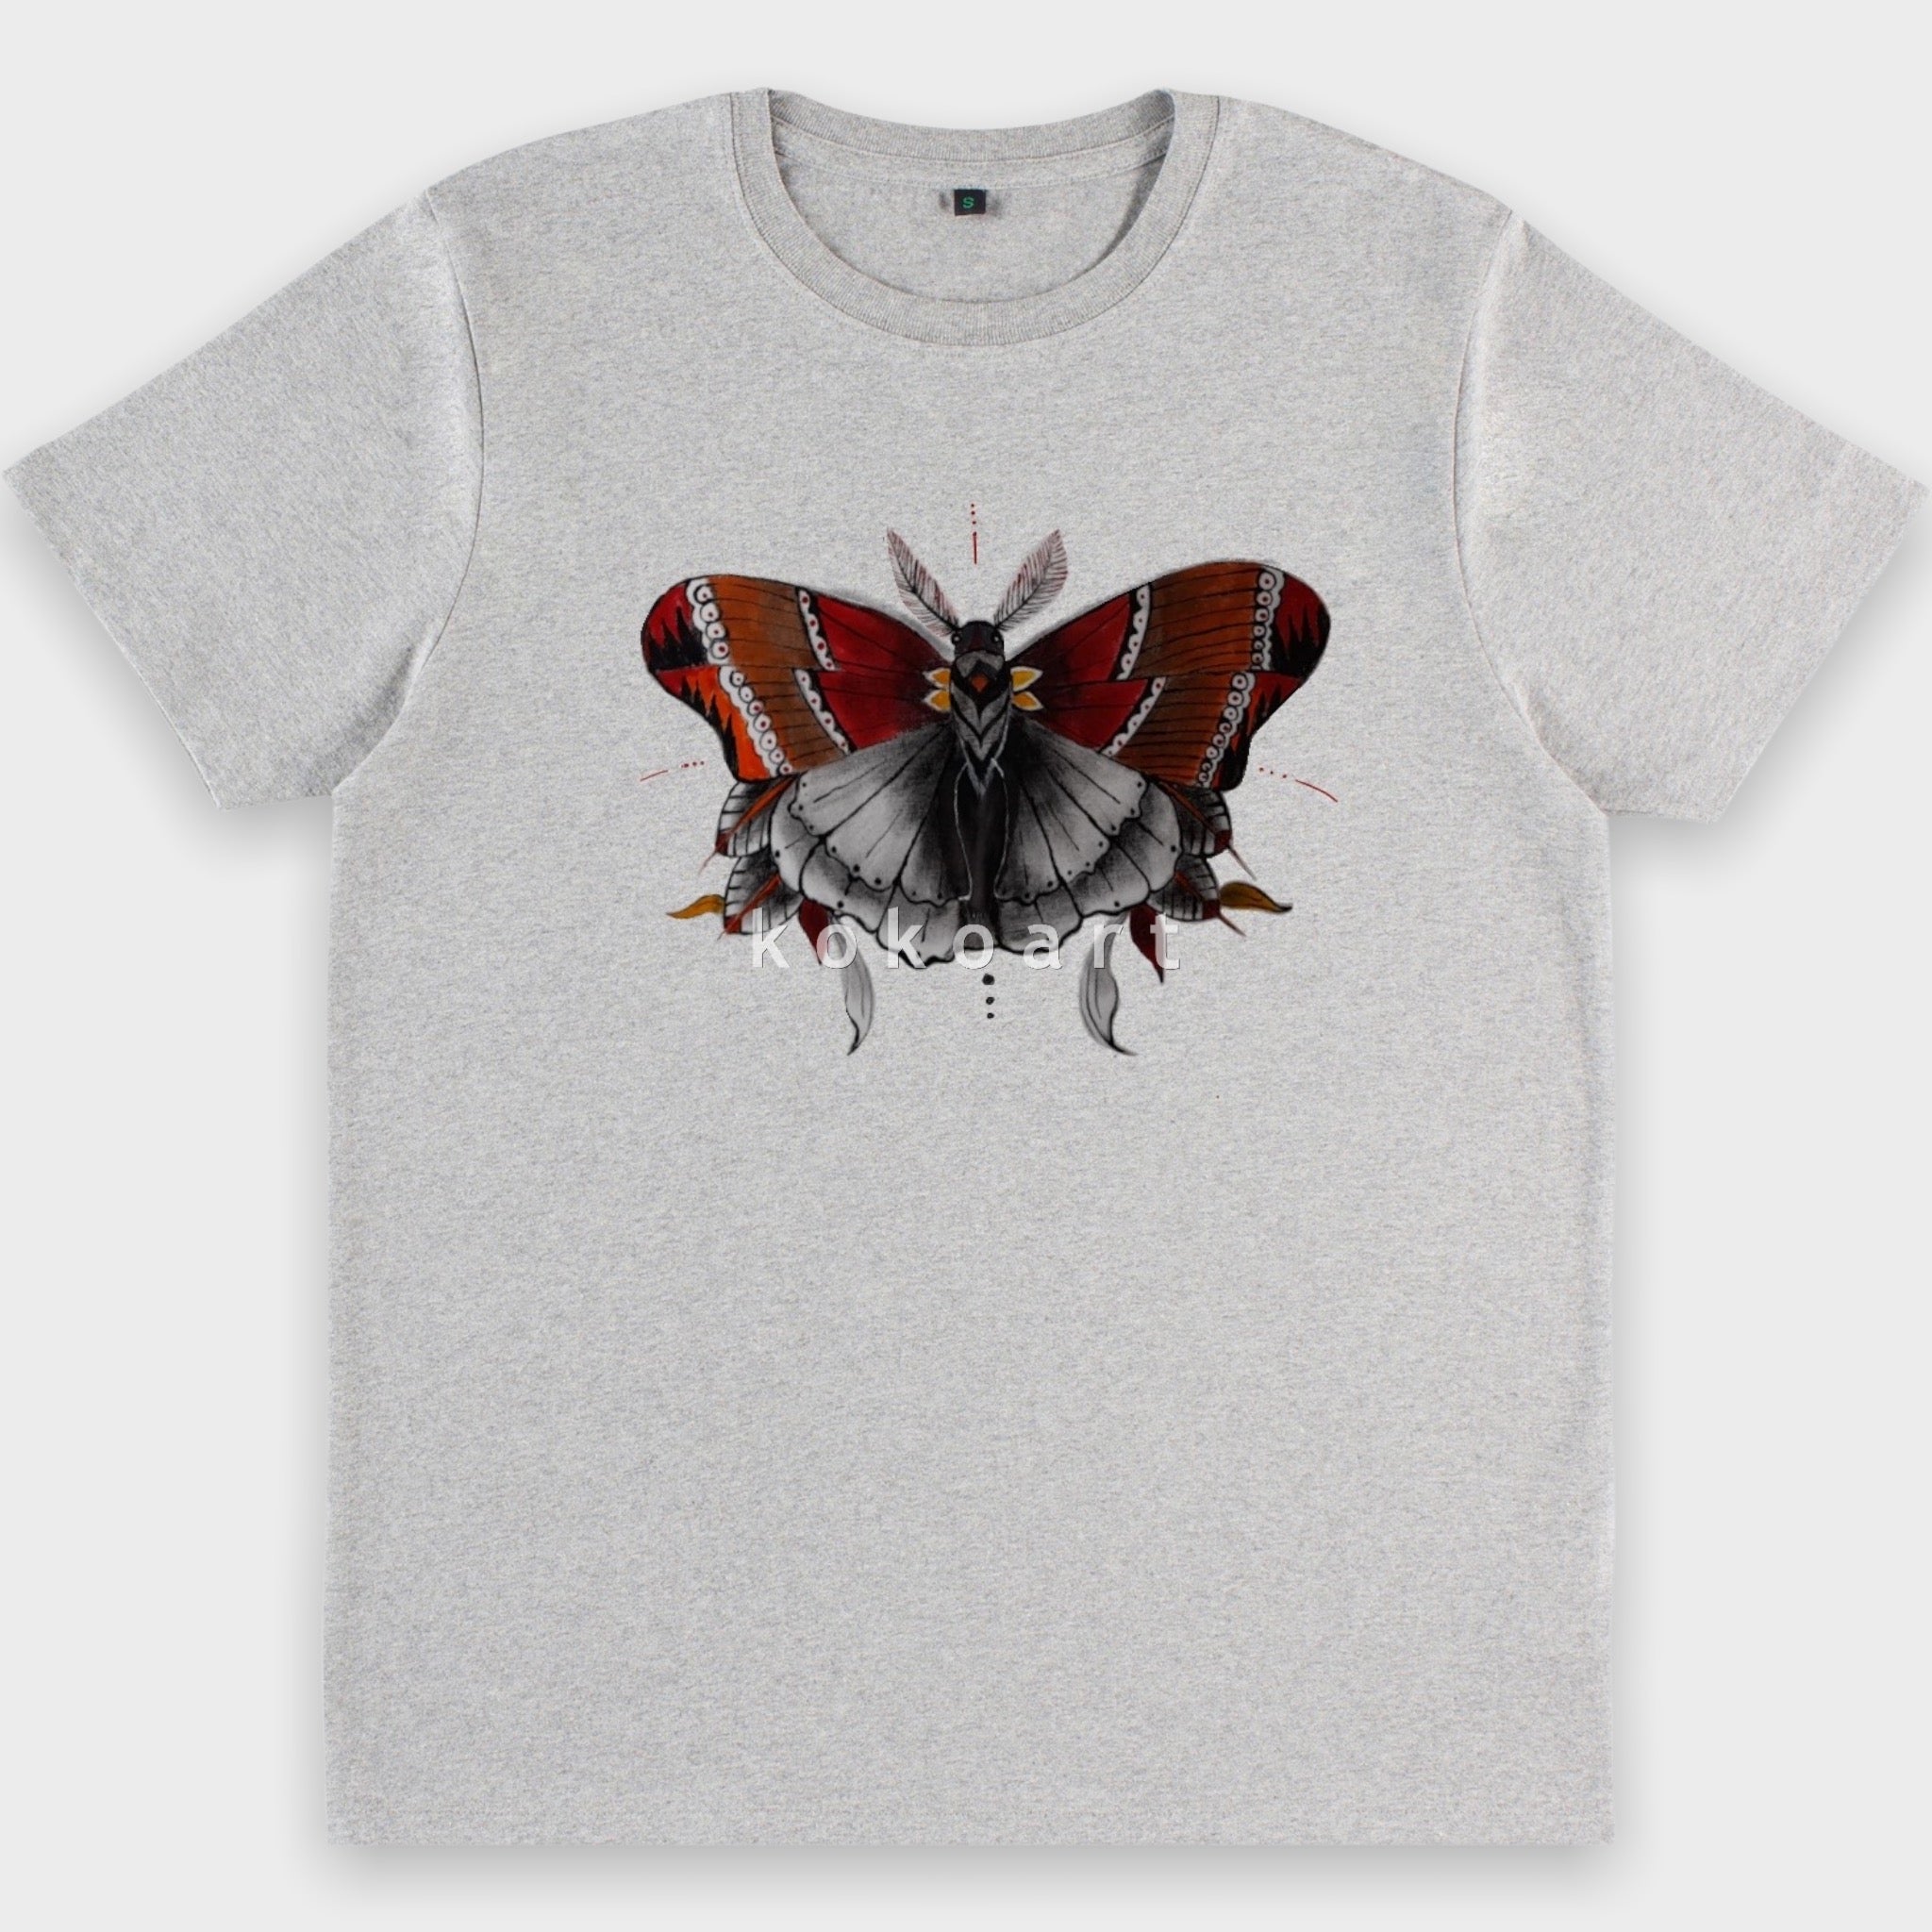 Butterfly - Hand painted Organic Cotton Clothing